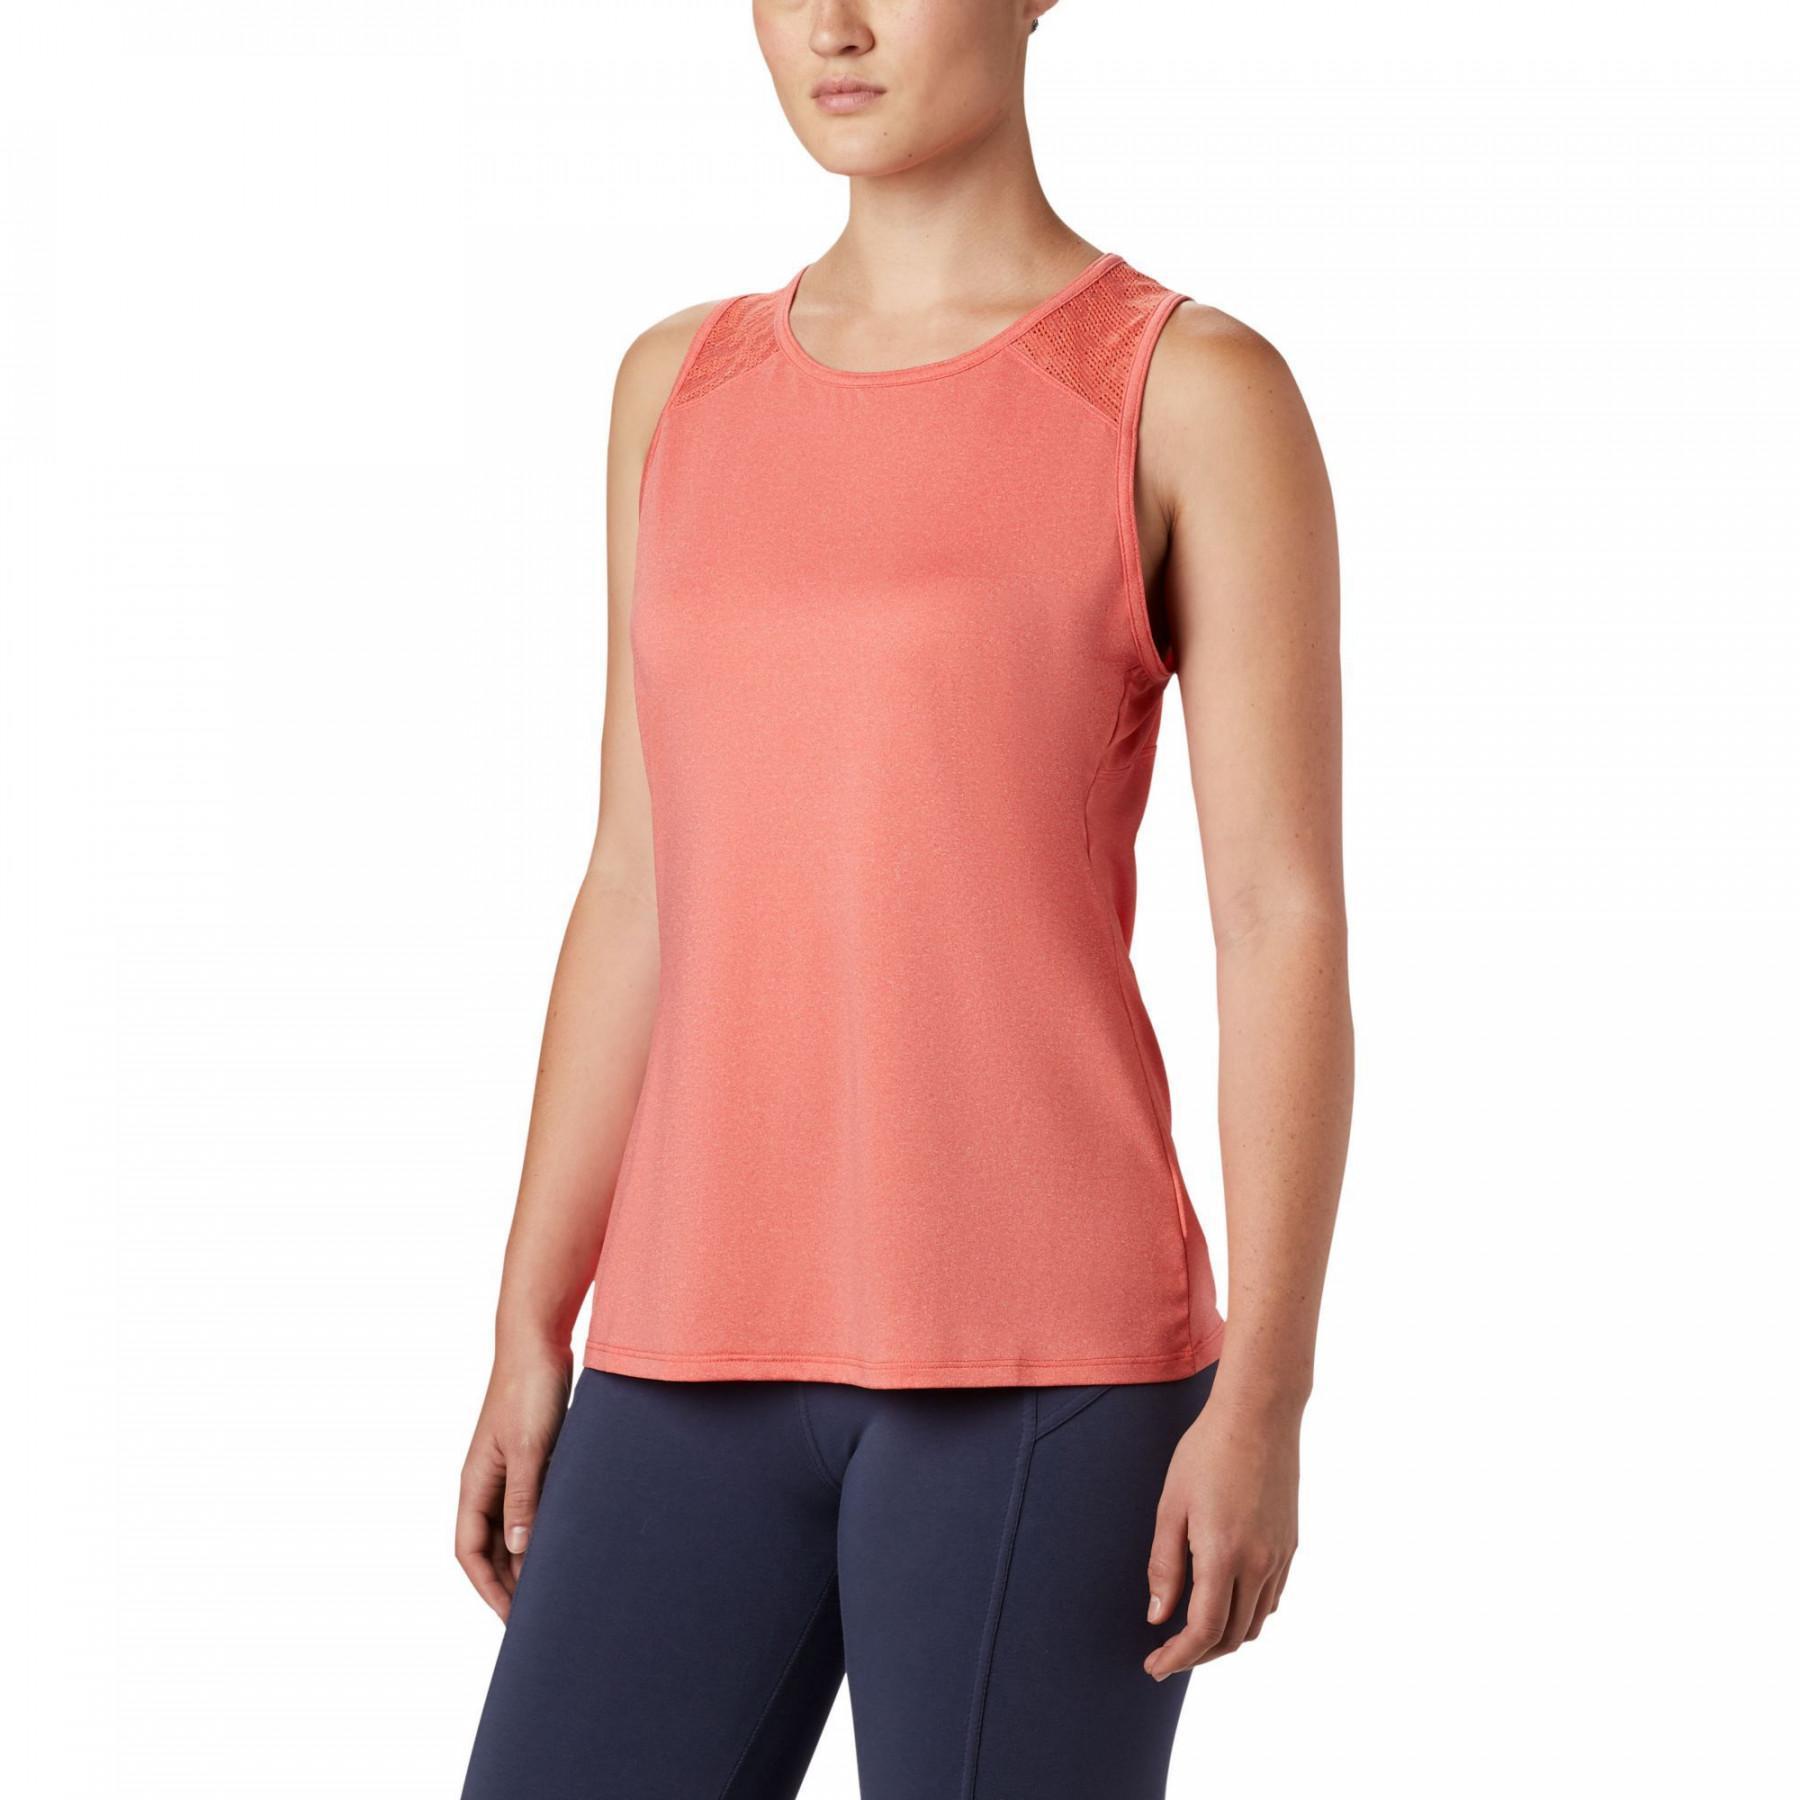 Women's tank top Columbia Peak to Point II - Tank tops - The Heights -  Womens Clothing